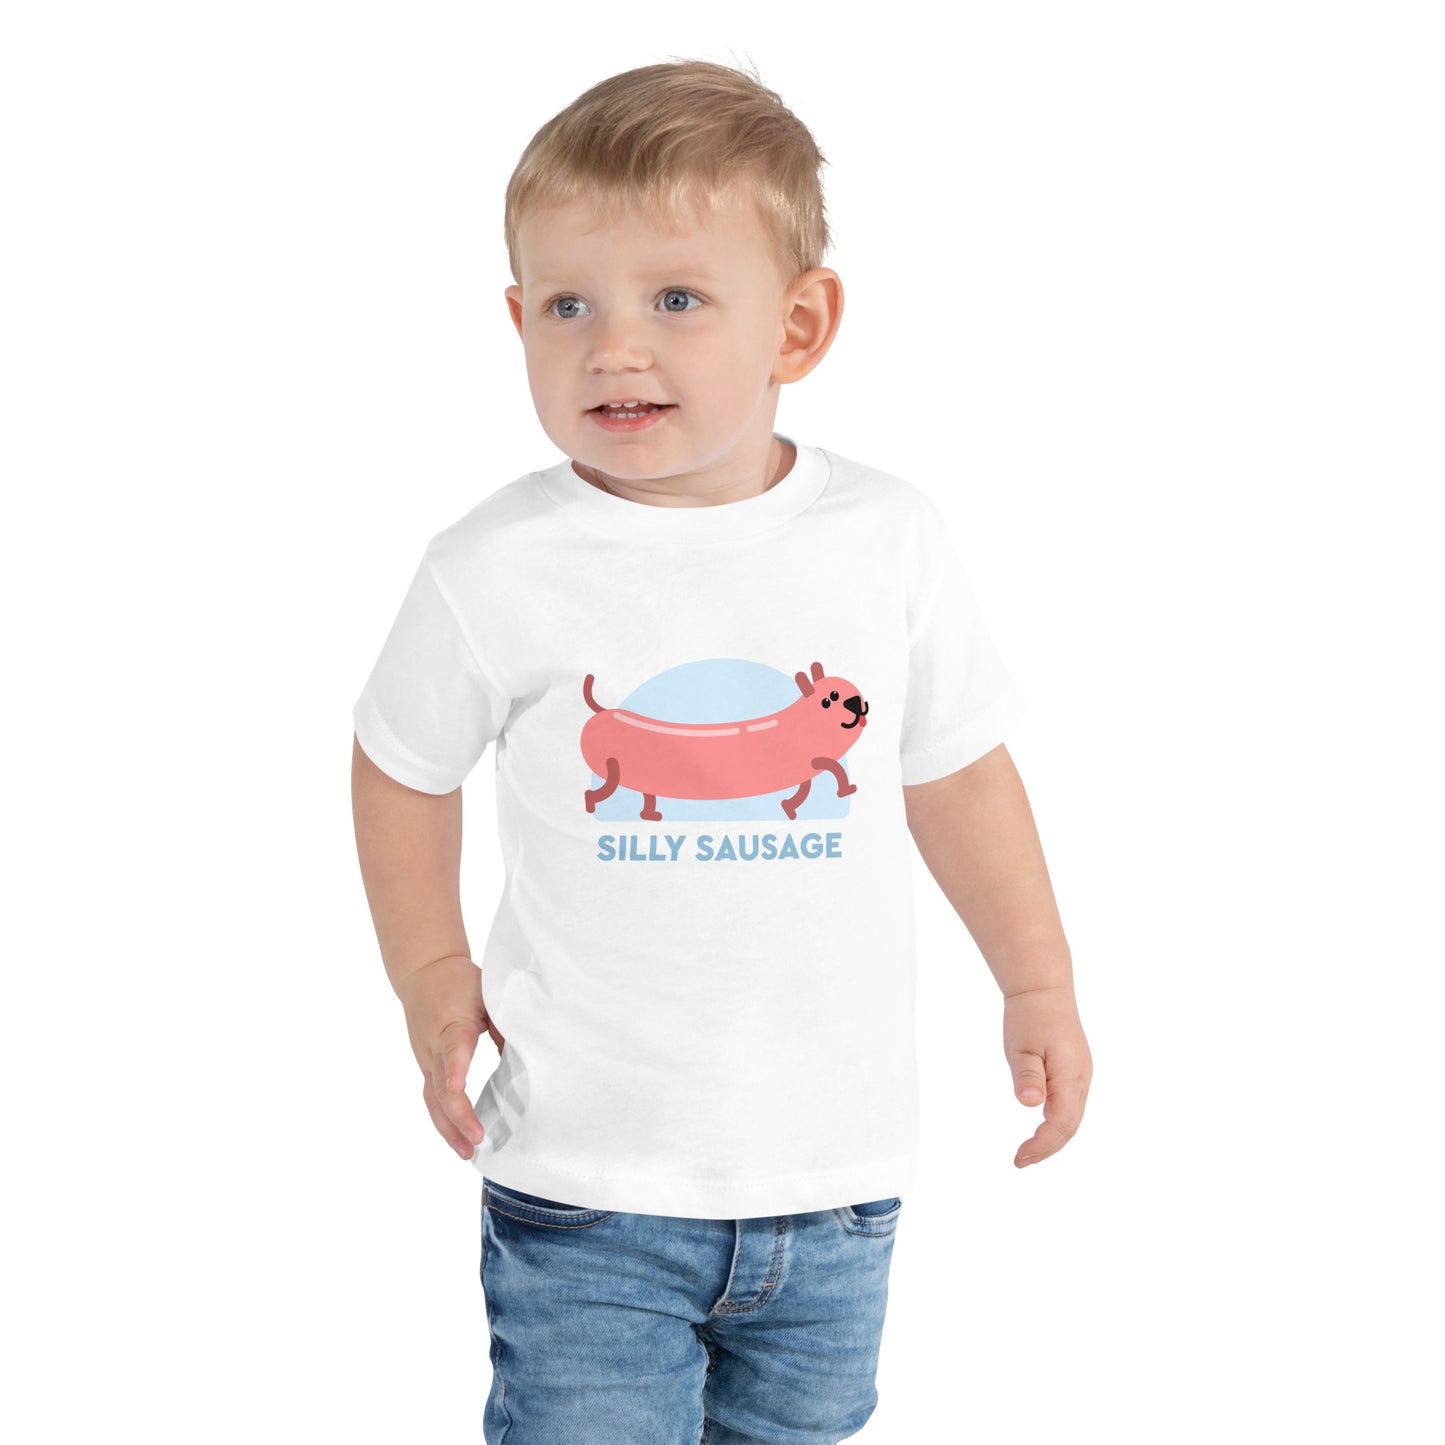 Toddler - Silly Sausage - Short Sleeve Tee